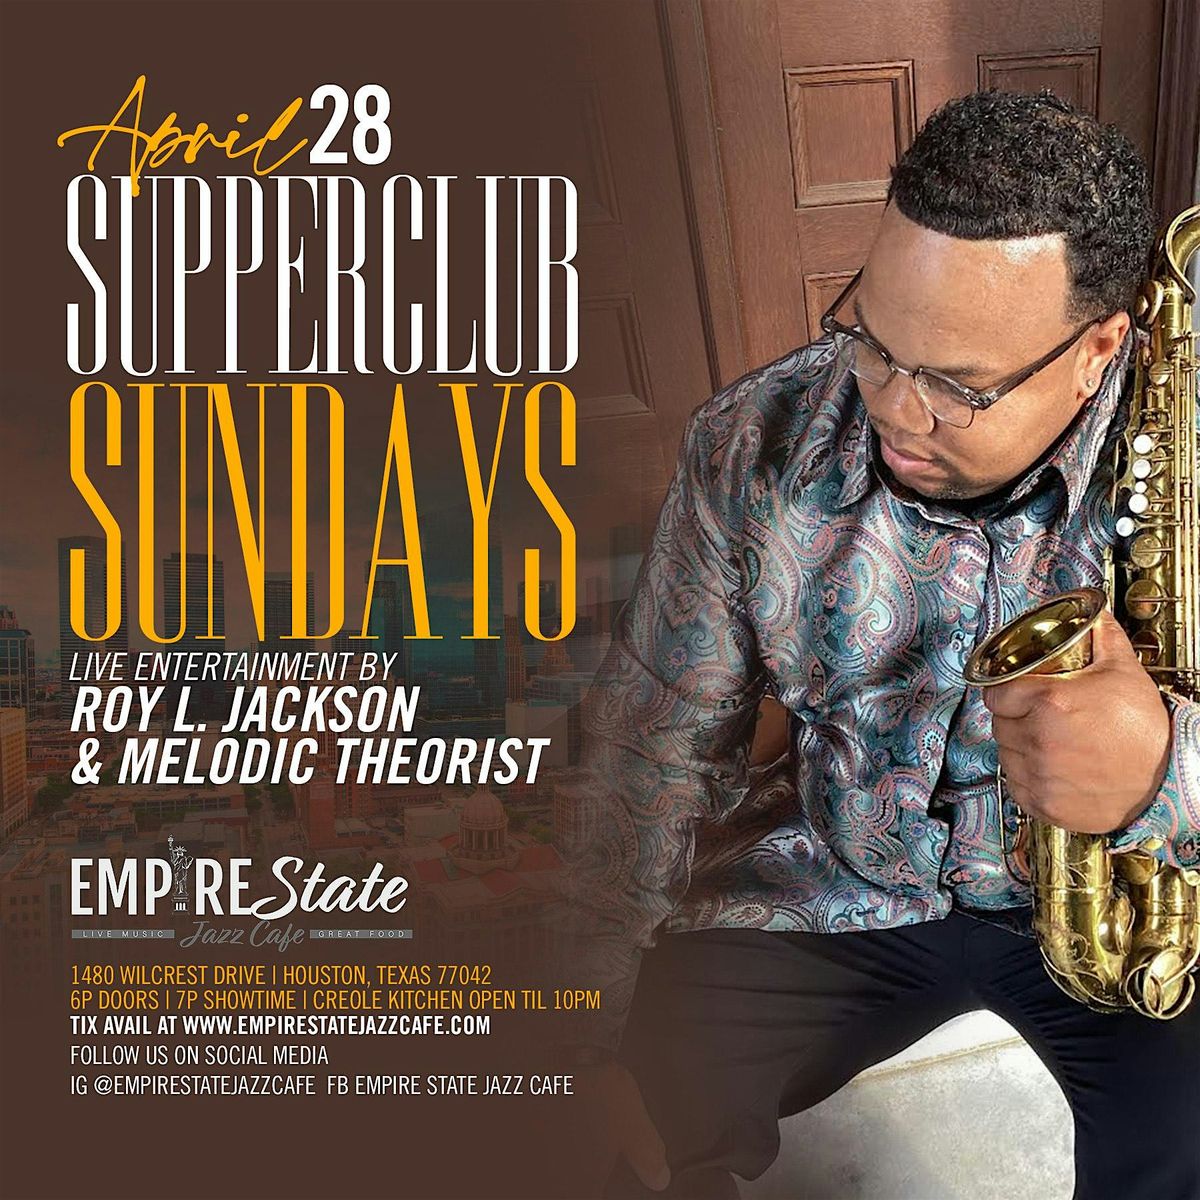 4\/28 - Supper Club Sundays with Roy L. Jackson & Melodic Theorist